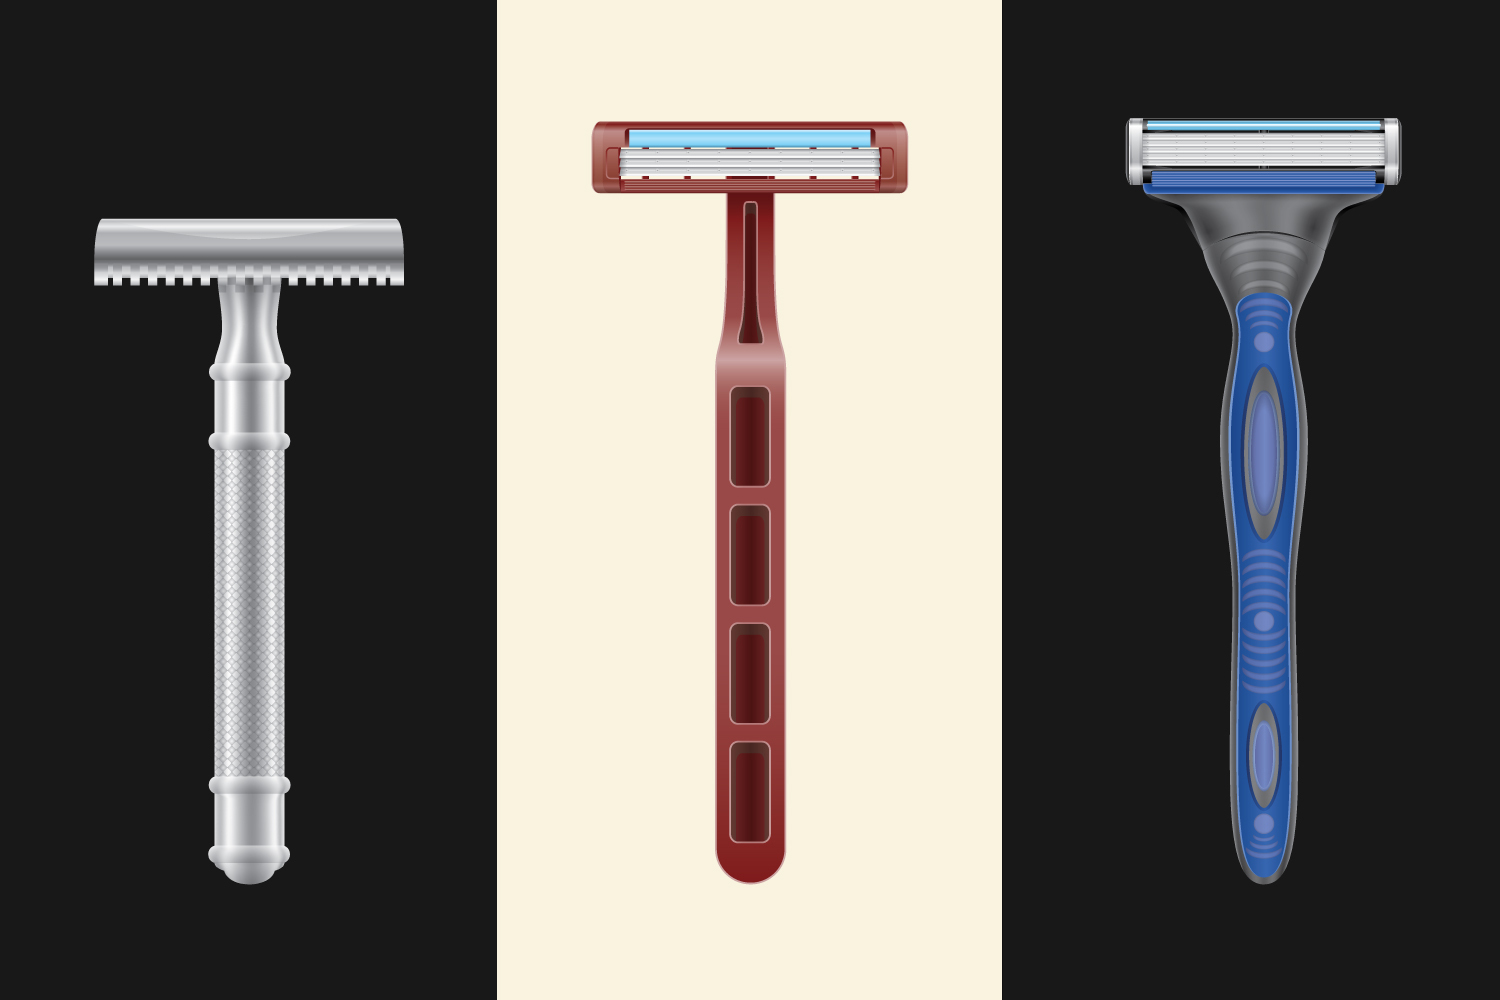 Three men's razors, one a safety razor with one blade, one with three blades and a third one with five blades